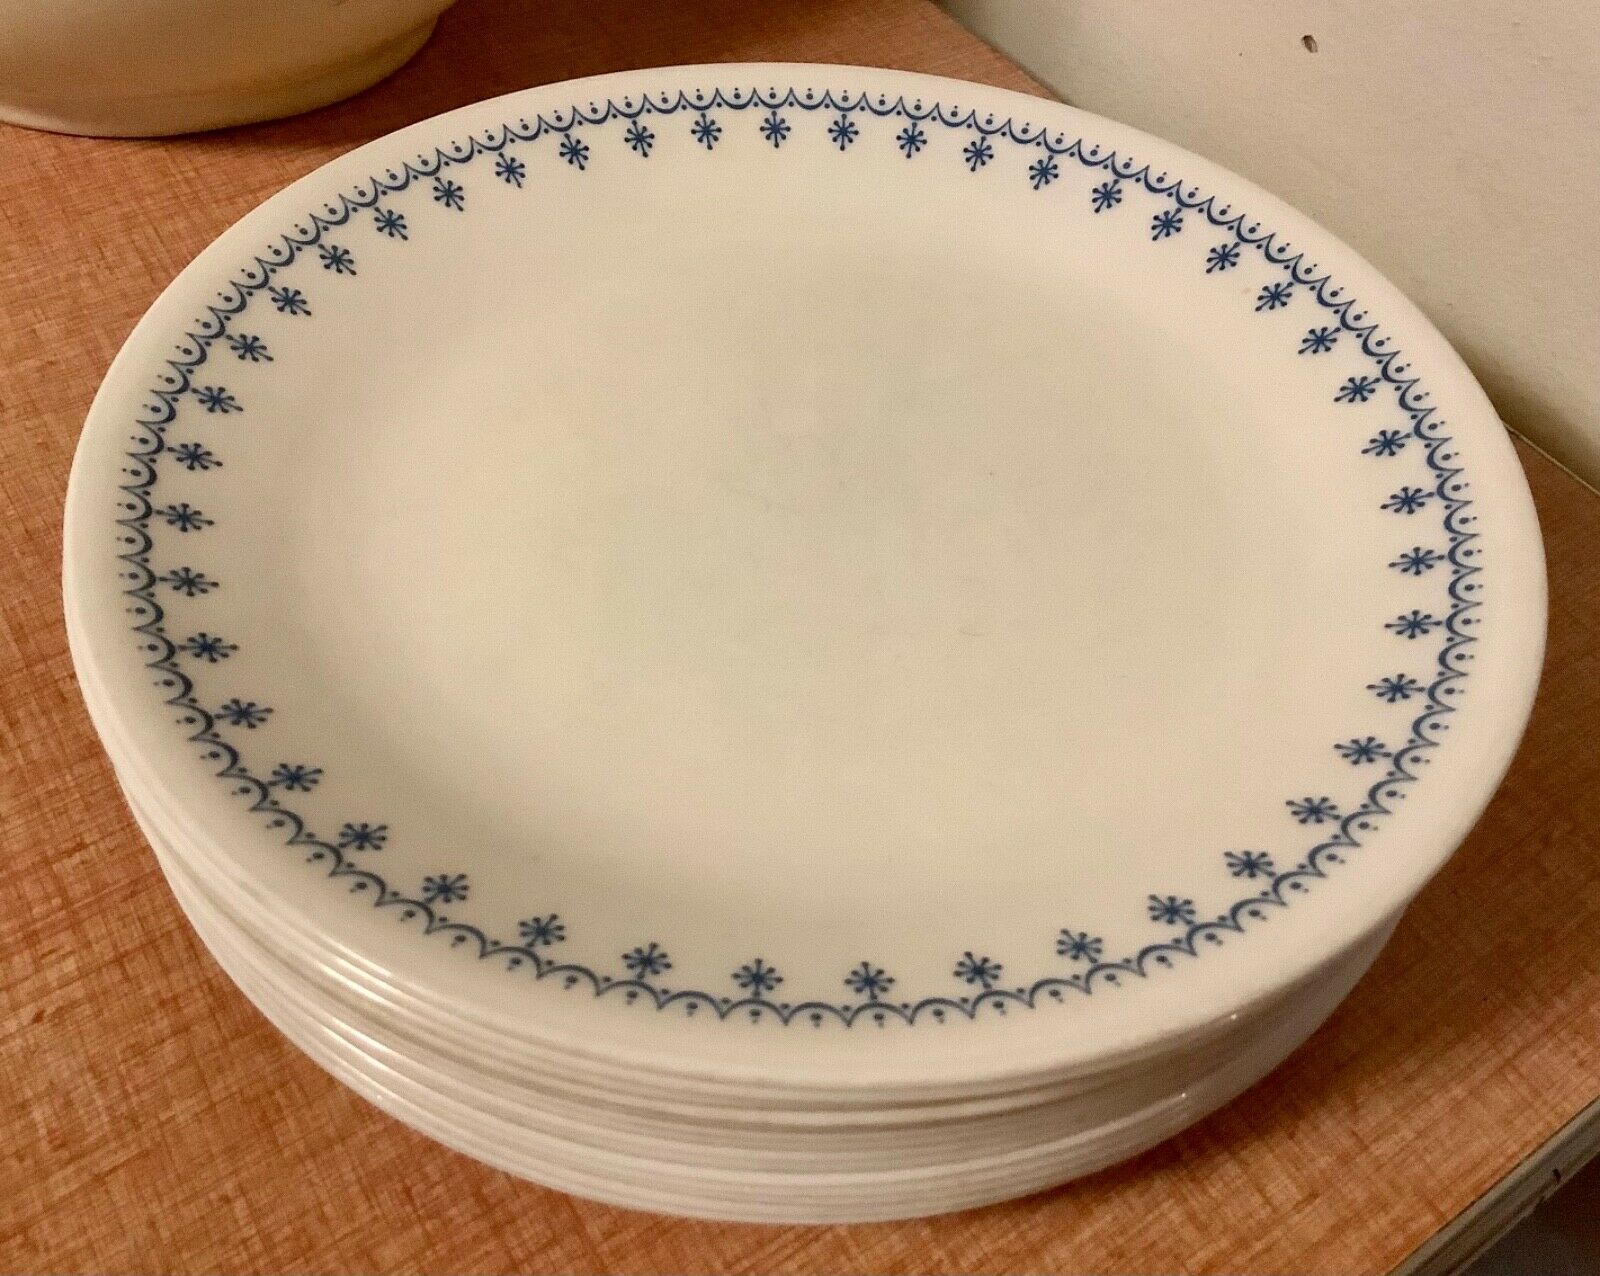 15 Vtg Corelle Blue Snowflake Garland Lunch luncheon Plates 8 1/2" Corning